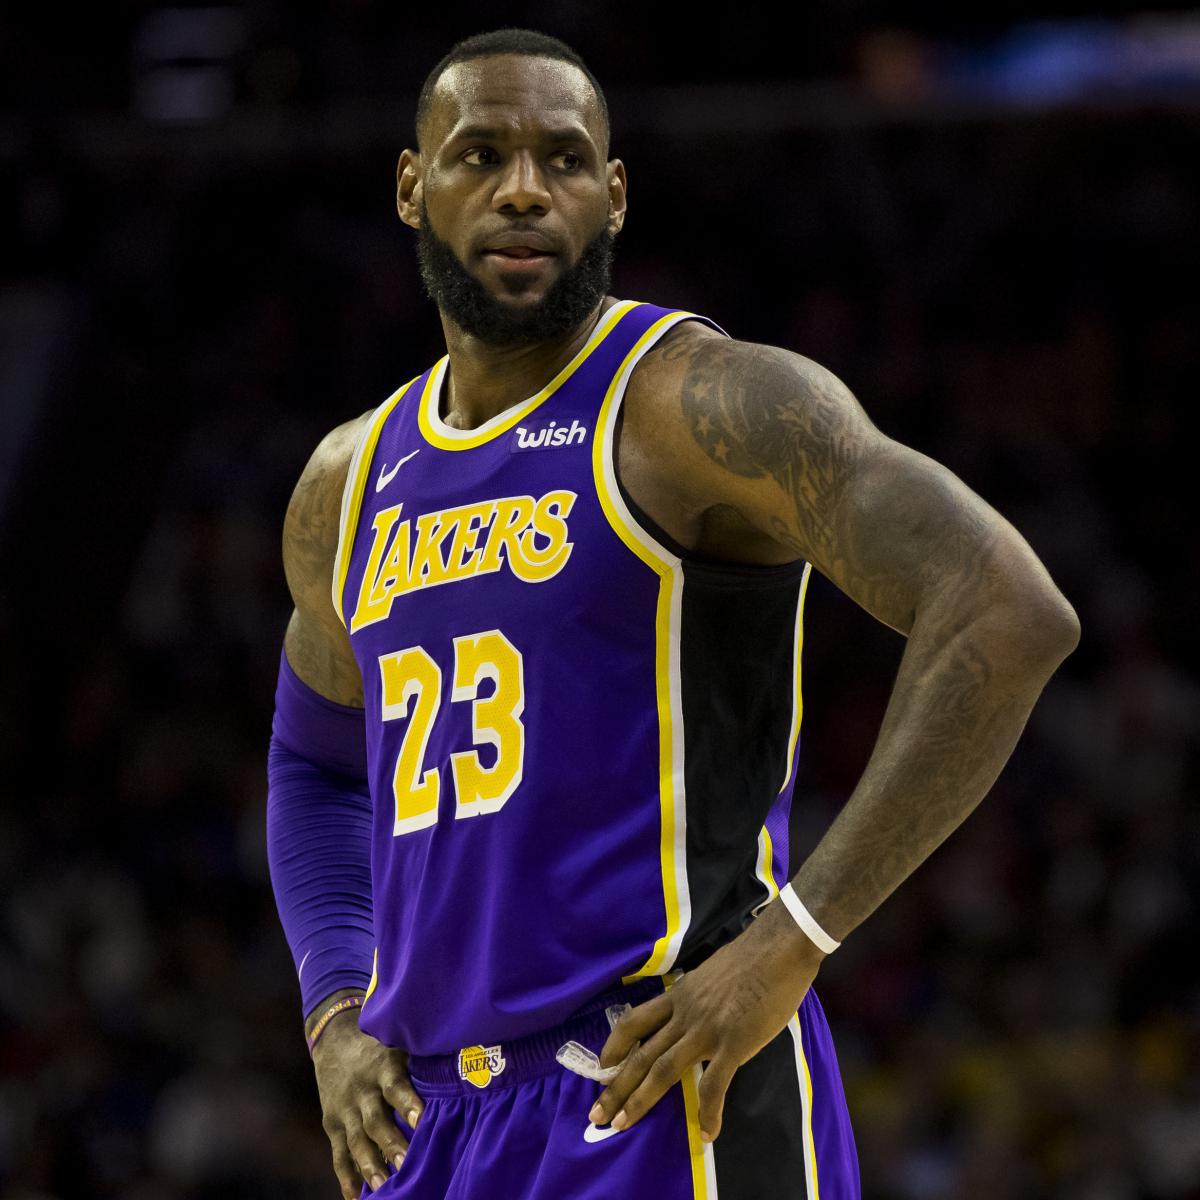 NBA All-Star Game 2019: Schedule, Odds, LeBron vs. Giannis Rosters, Predictions ...